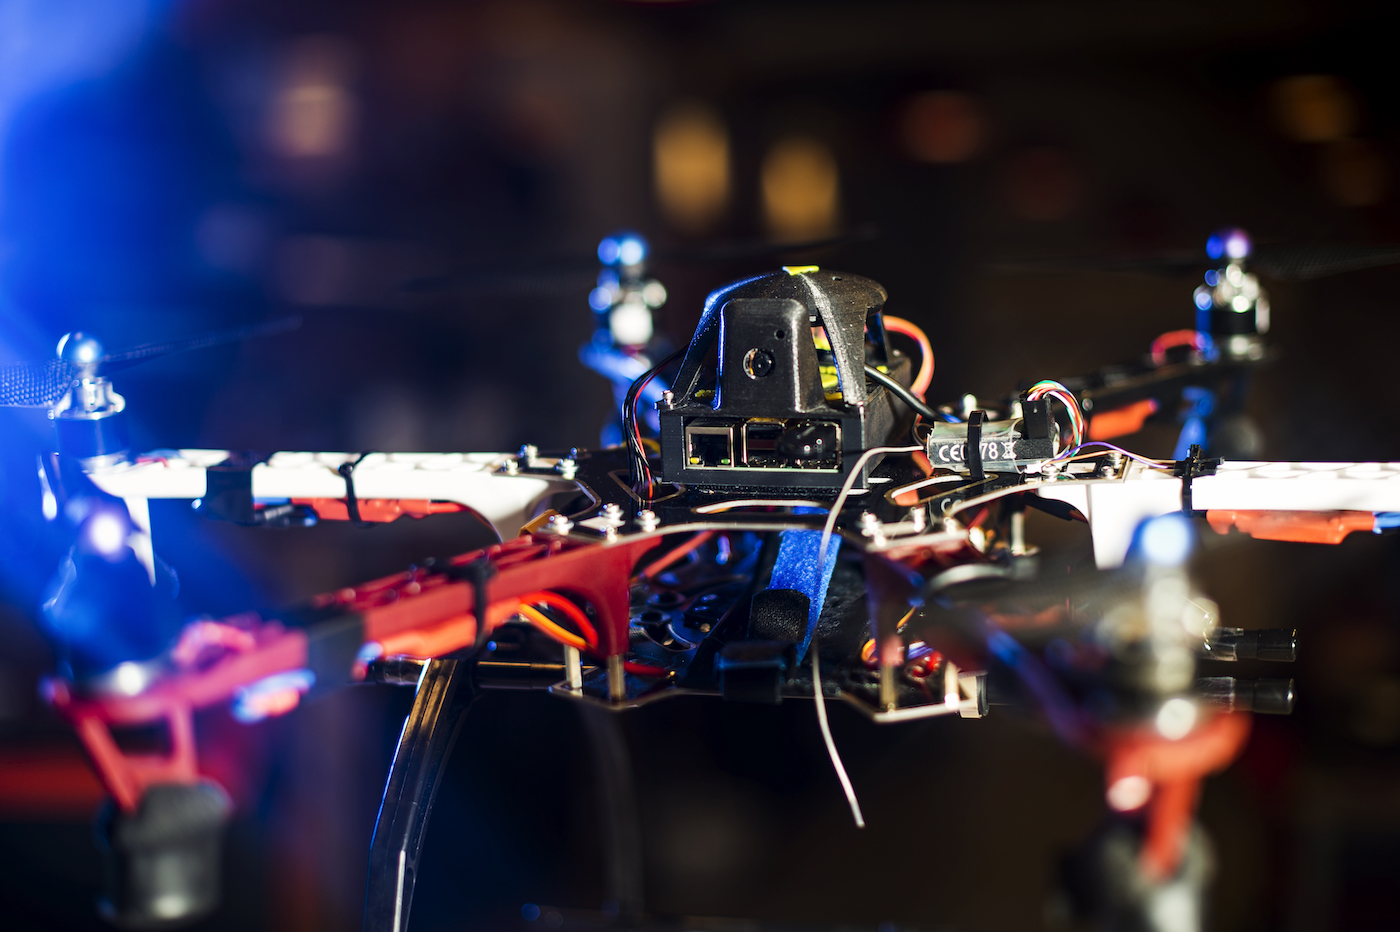 A hexi-copter drone in Taskin Padir's lab. The ultimate vision is a robot swarm deployed to assist engineers in damage inspection. Photo by Adam Glanzman/Northeastern University